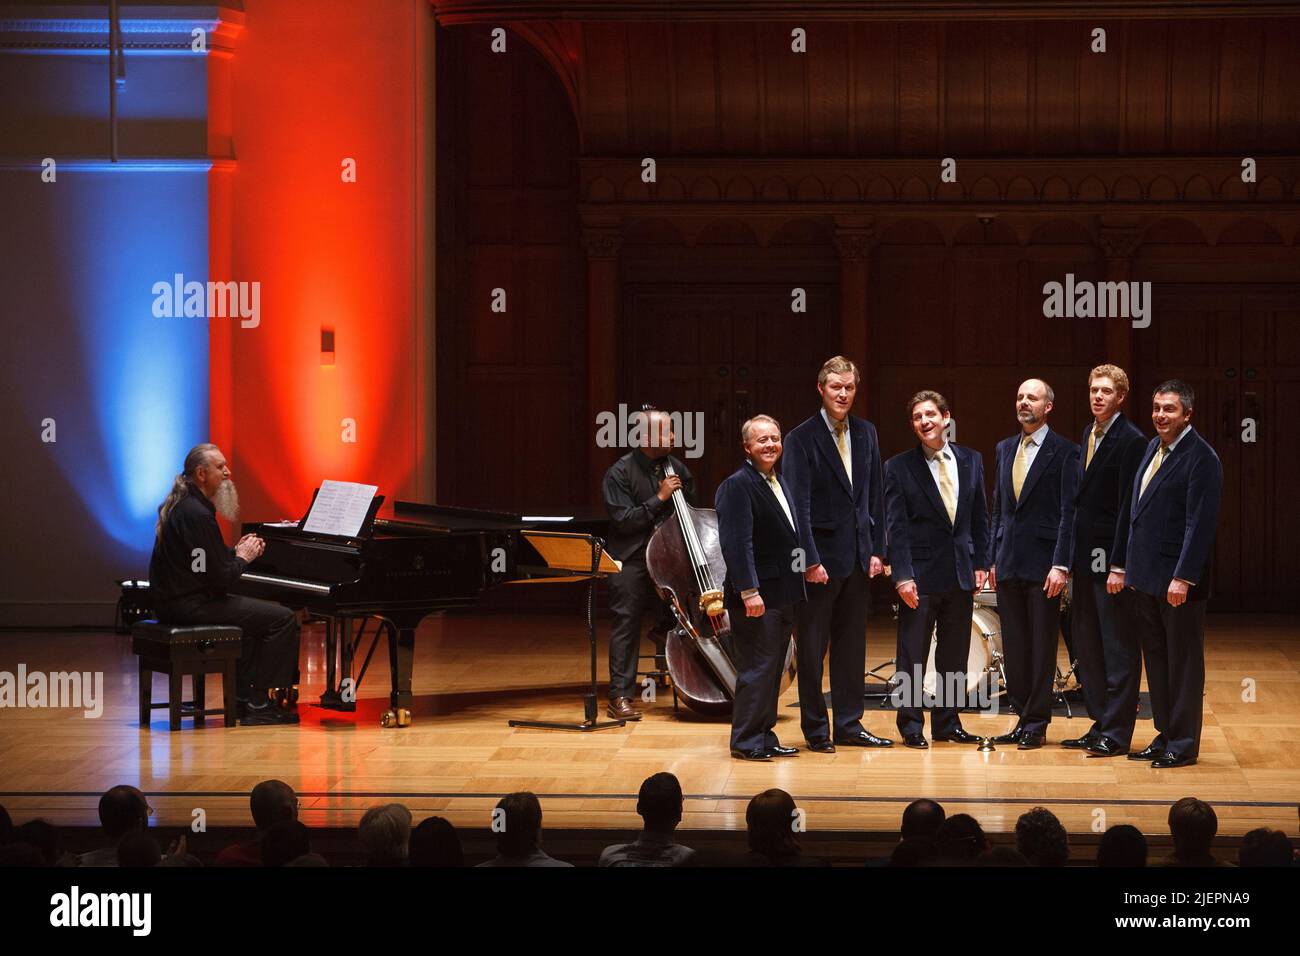 The King's Singers 40th anniversary concert at Cadogan Hall, Sloane Terrace, London, UK.  30 Apr 2008 Stock Photo